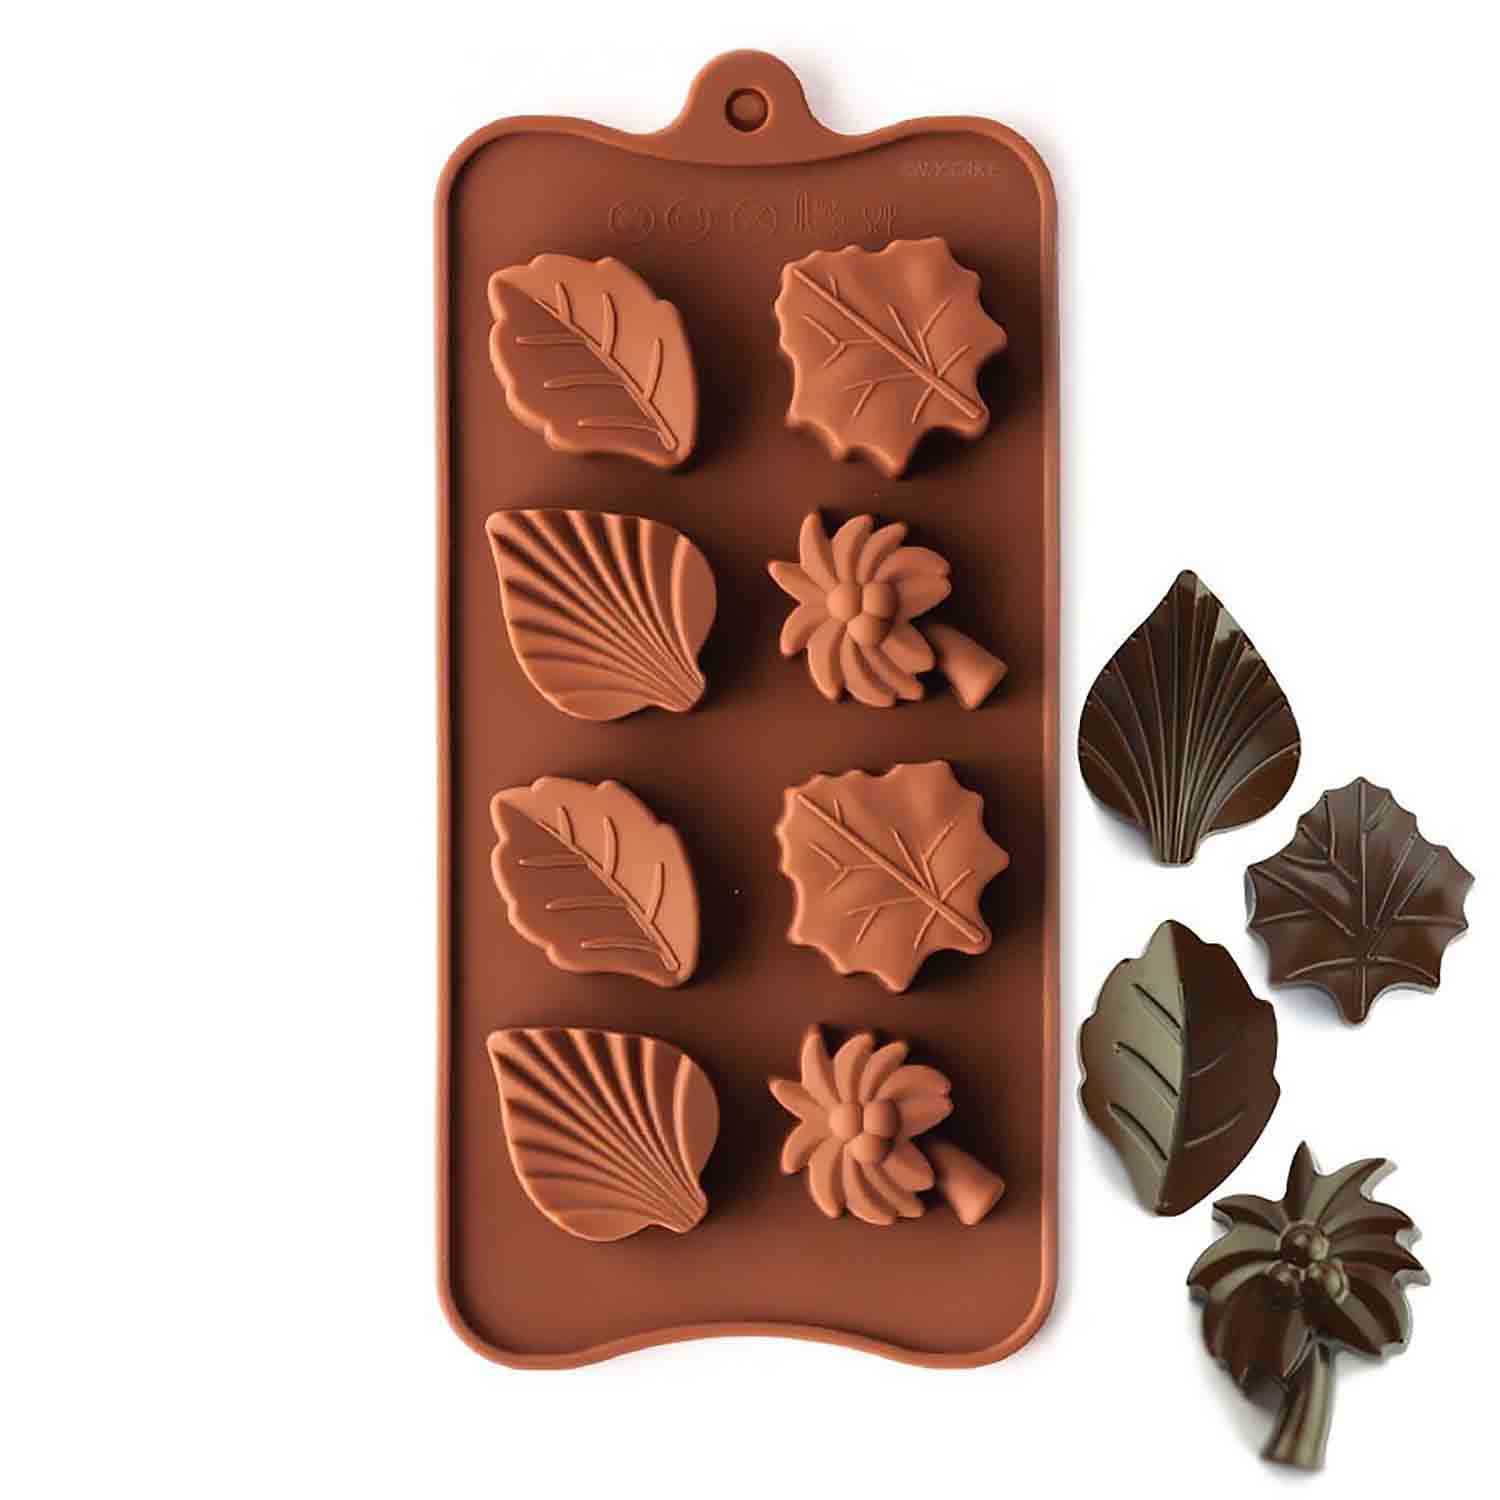 Silicone Maple Candy Mold, 2-Piece Set (Includes Recipe Card)